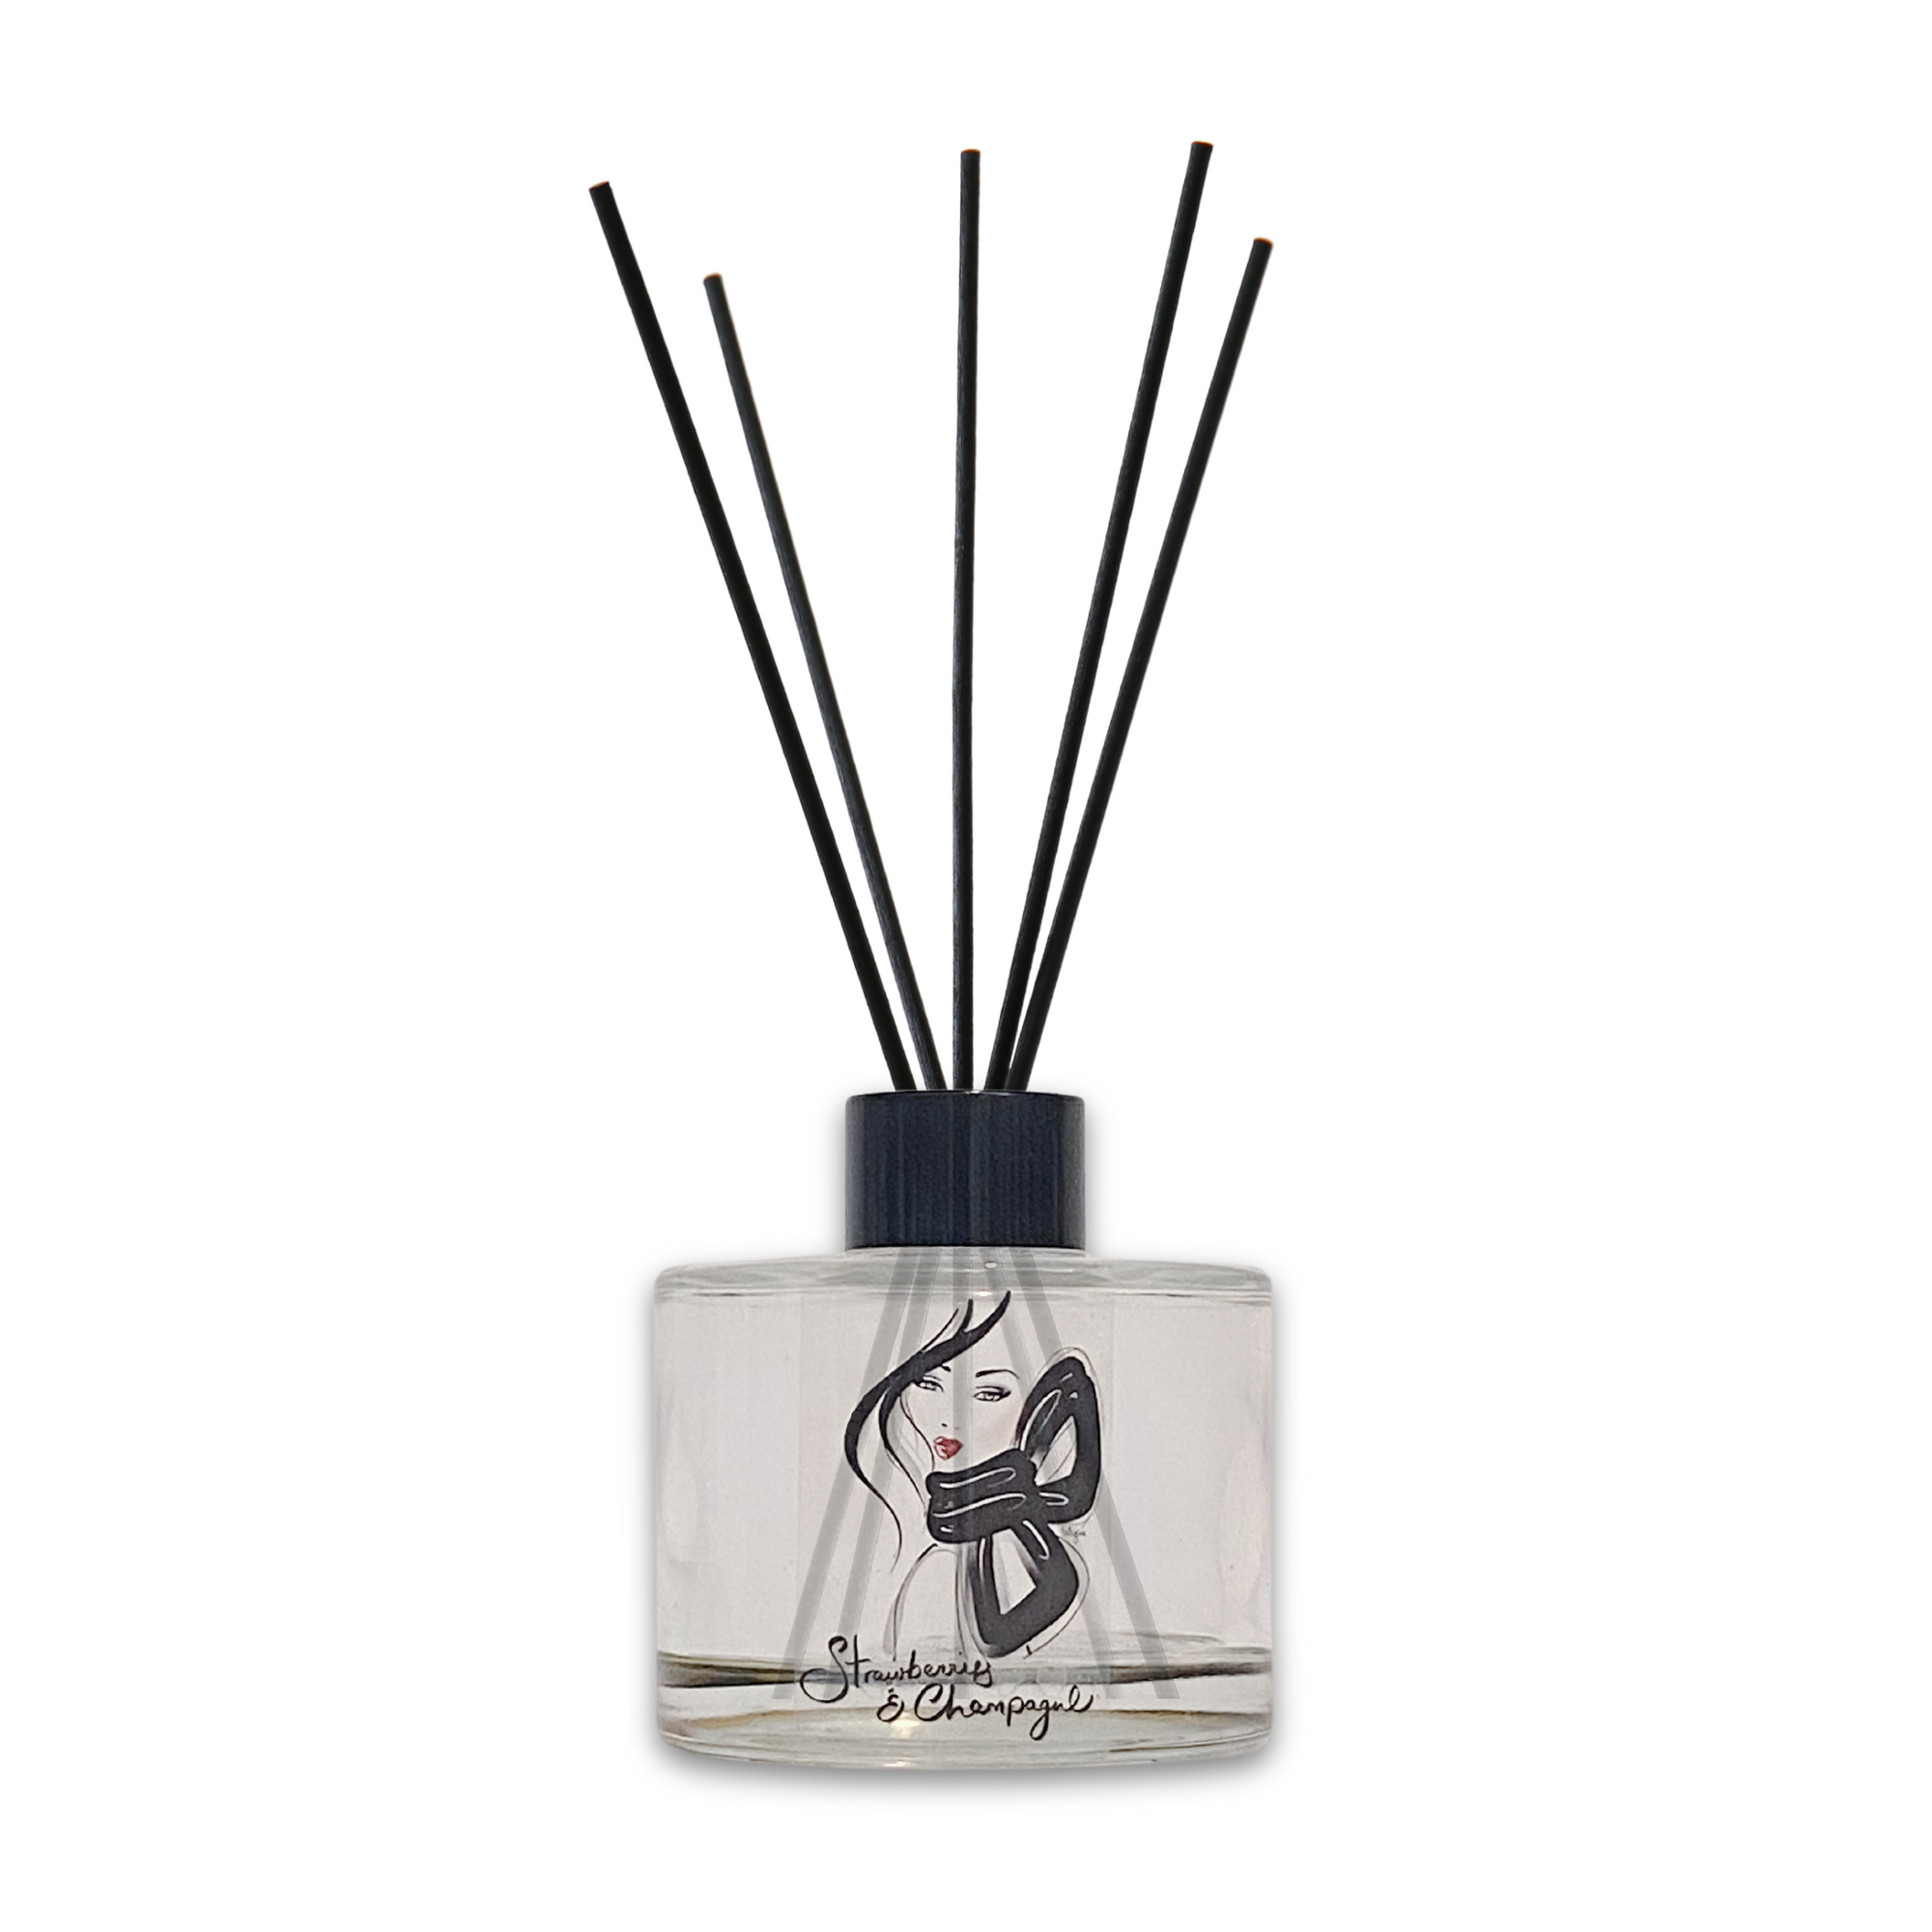 Glam Reed Diffuser - Strawberry & Champagne